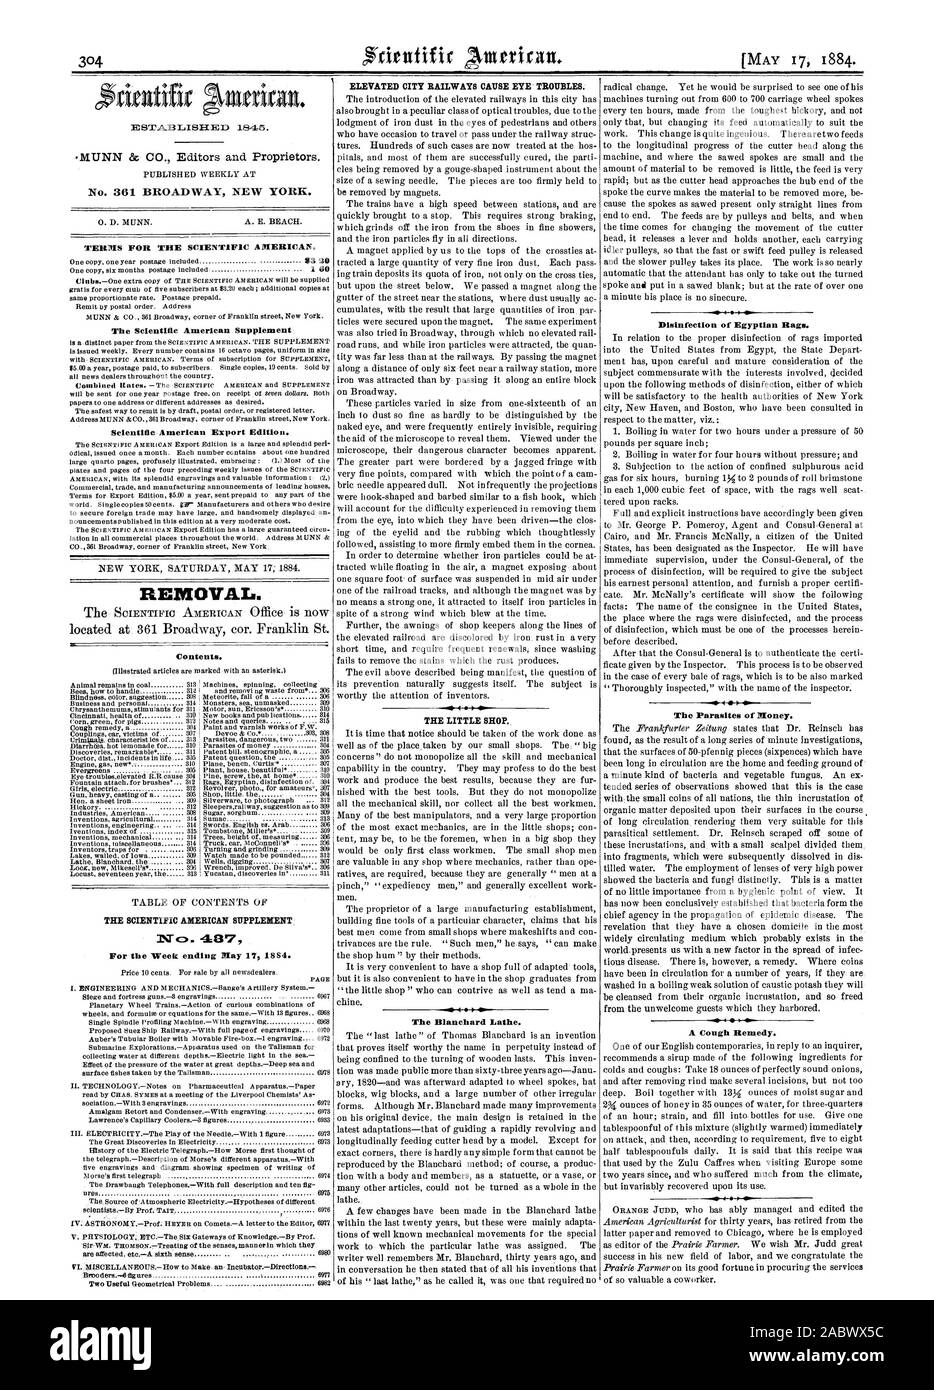 PUBLISHED WEEKLY AT No. 361 BROADWAY NEW YORK. 0. D. MUNN. A. E. BEACH. TERMS FOR TUE SCIENTIFIC AMERICAN. 2 The Scientific American Supplement Scientific American Export Edition. NEW YORK SATURDAY MAY 17; 1884. REMOVAL. Contents. 396 TABLE OF CONTENTS OF THE SCIENTIFIC AMERICAN SUPPLEMENT N. 487 PAGE ELEVATED CITY RAILWAYS CAUSE EYE TROUBLES. THE LITTLE SHOP. 4  The Blanchard Lathe. Disinfection of Egyptian Rags. The Parasites of Money. A Cough Remedy. ICSTARLIST:) 1845., 1884-05-17 Stock Photo